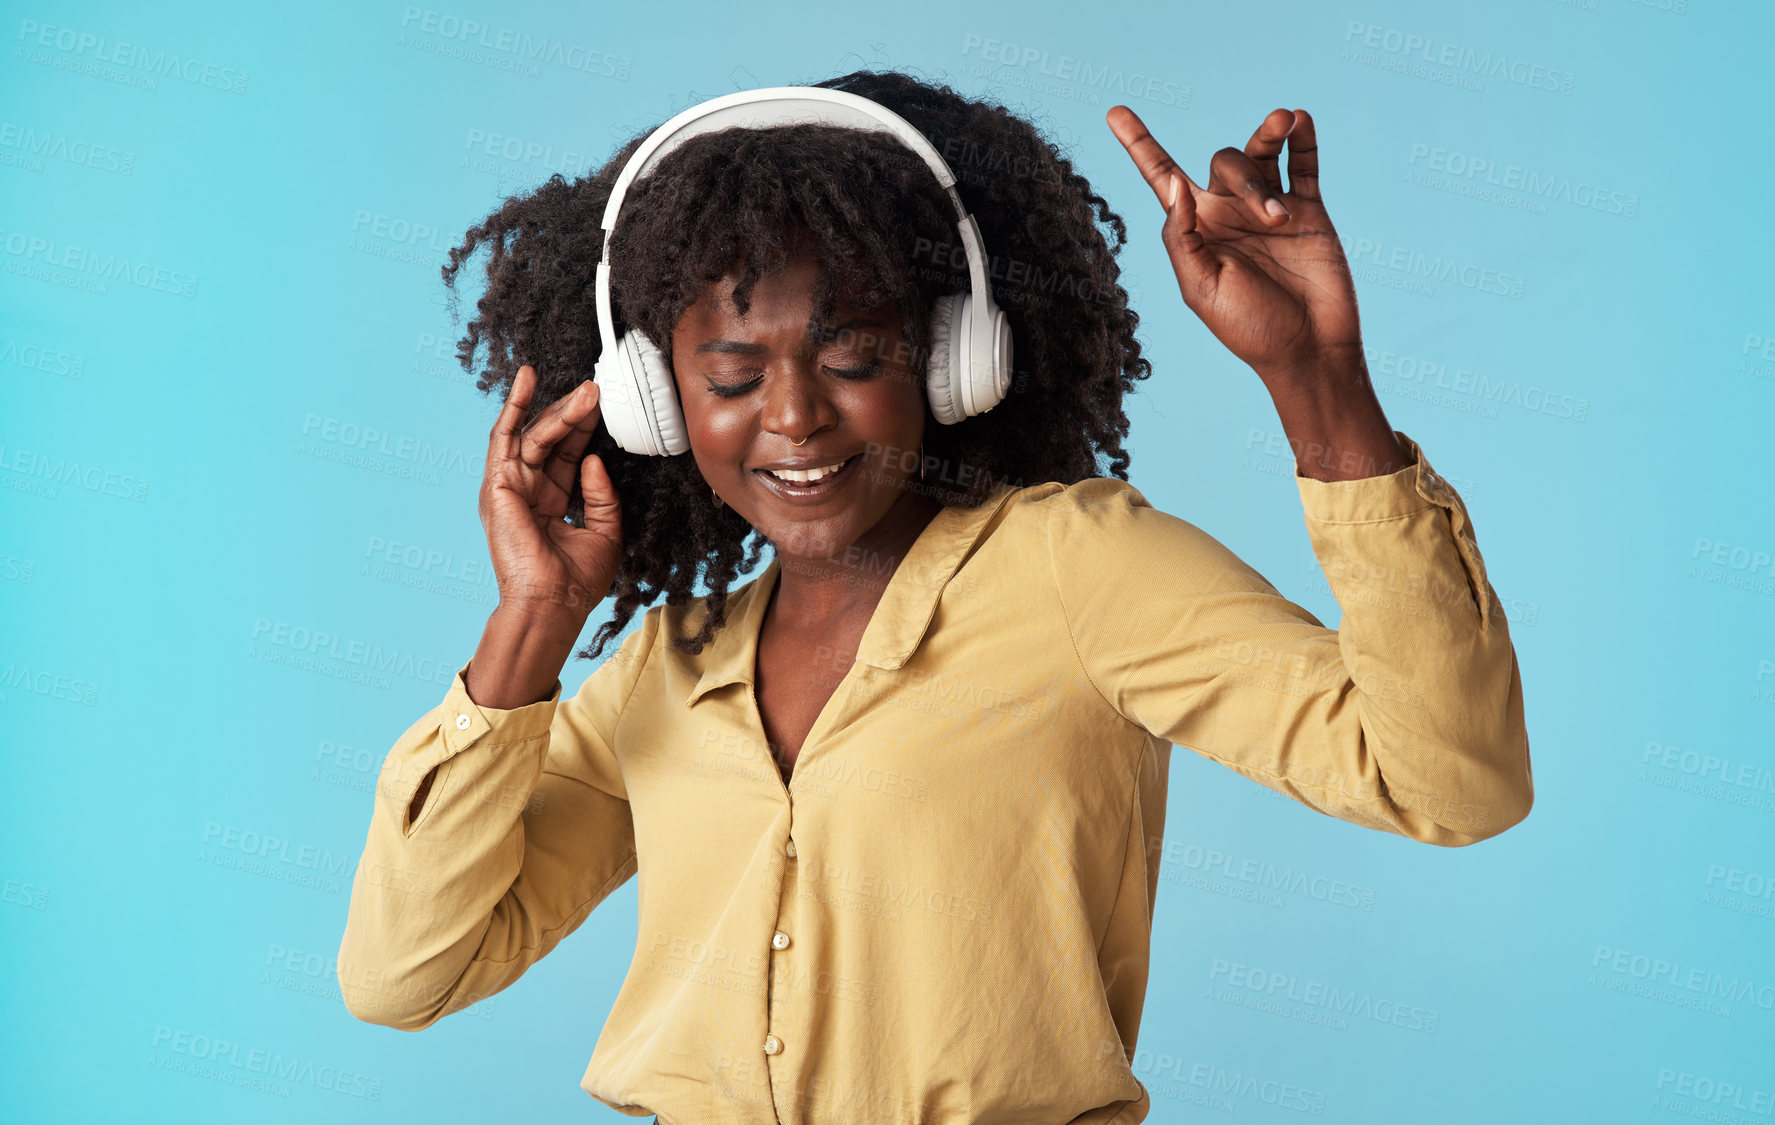 Buy stock photo Studio shot of a young woman using headphones and dancing against a blue background